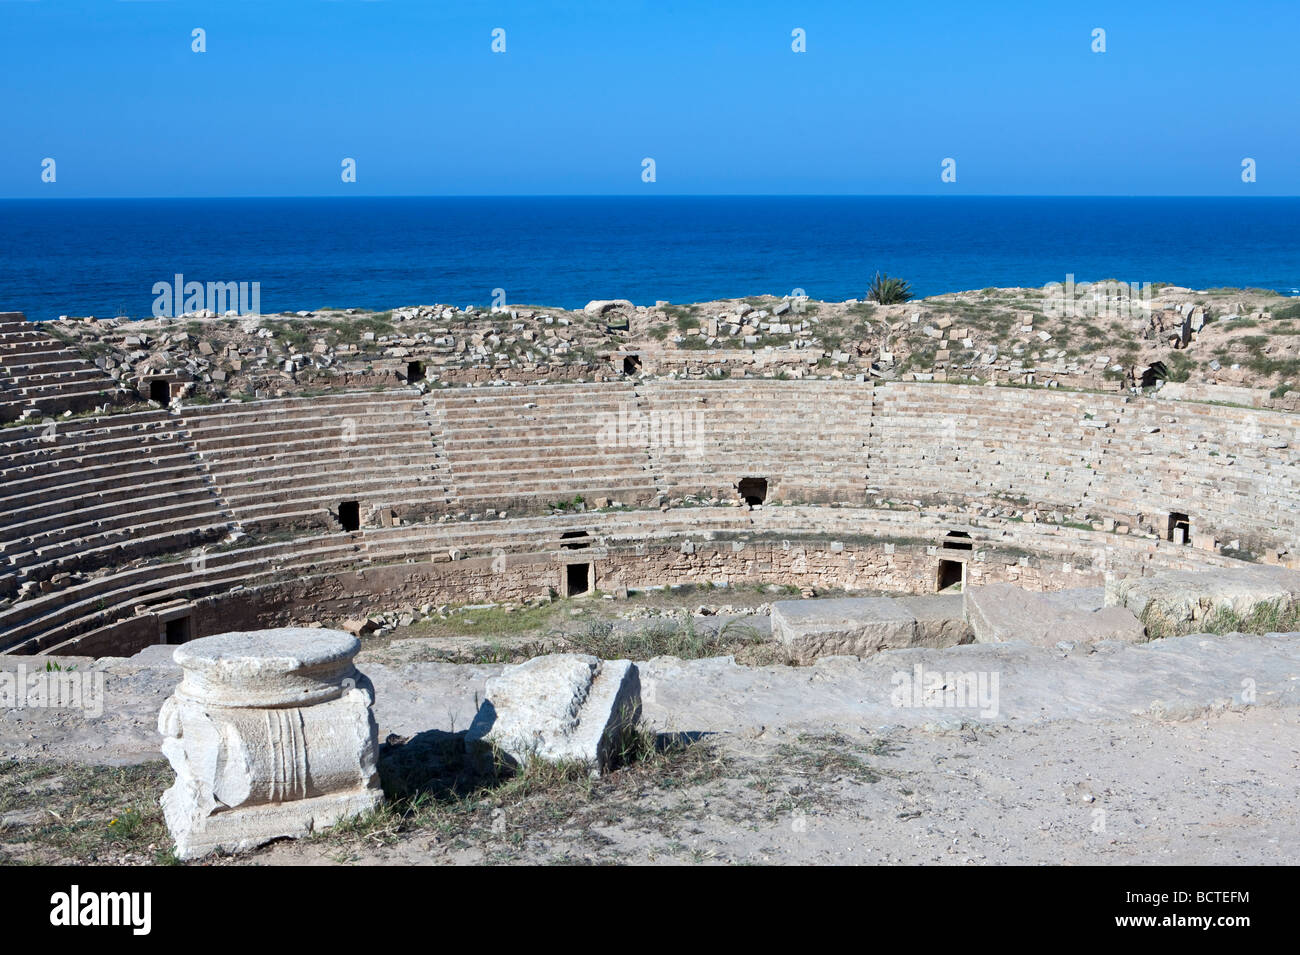 Libya archaeological site of Leptis Magna the amphitheatre Stock Photo